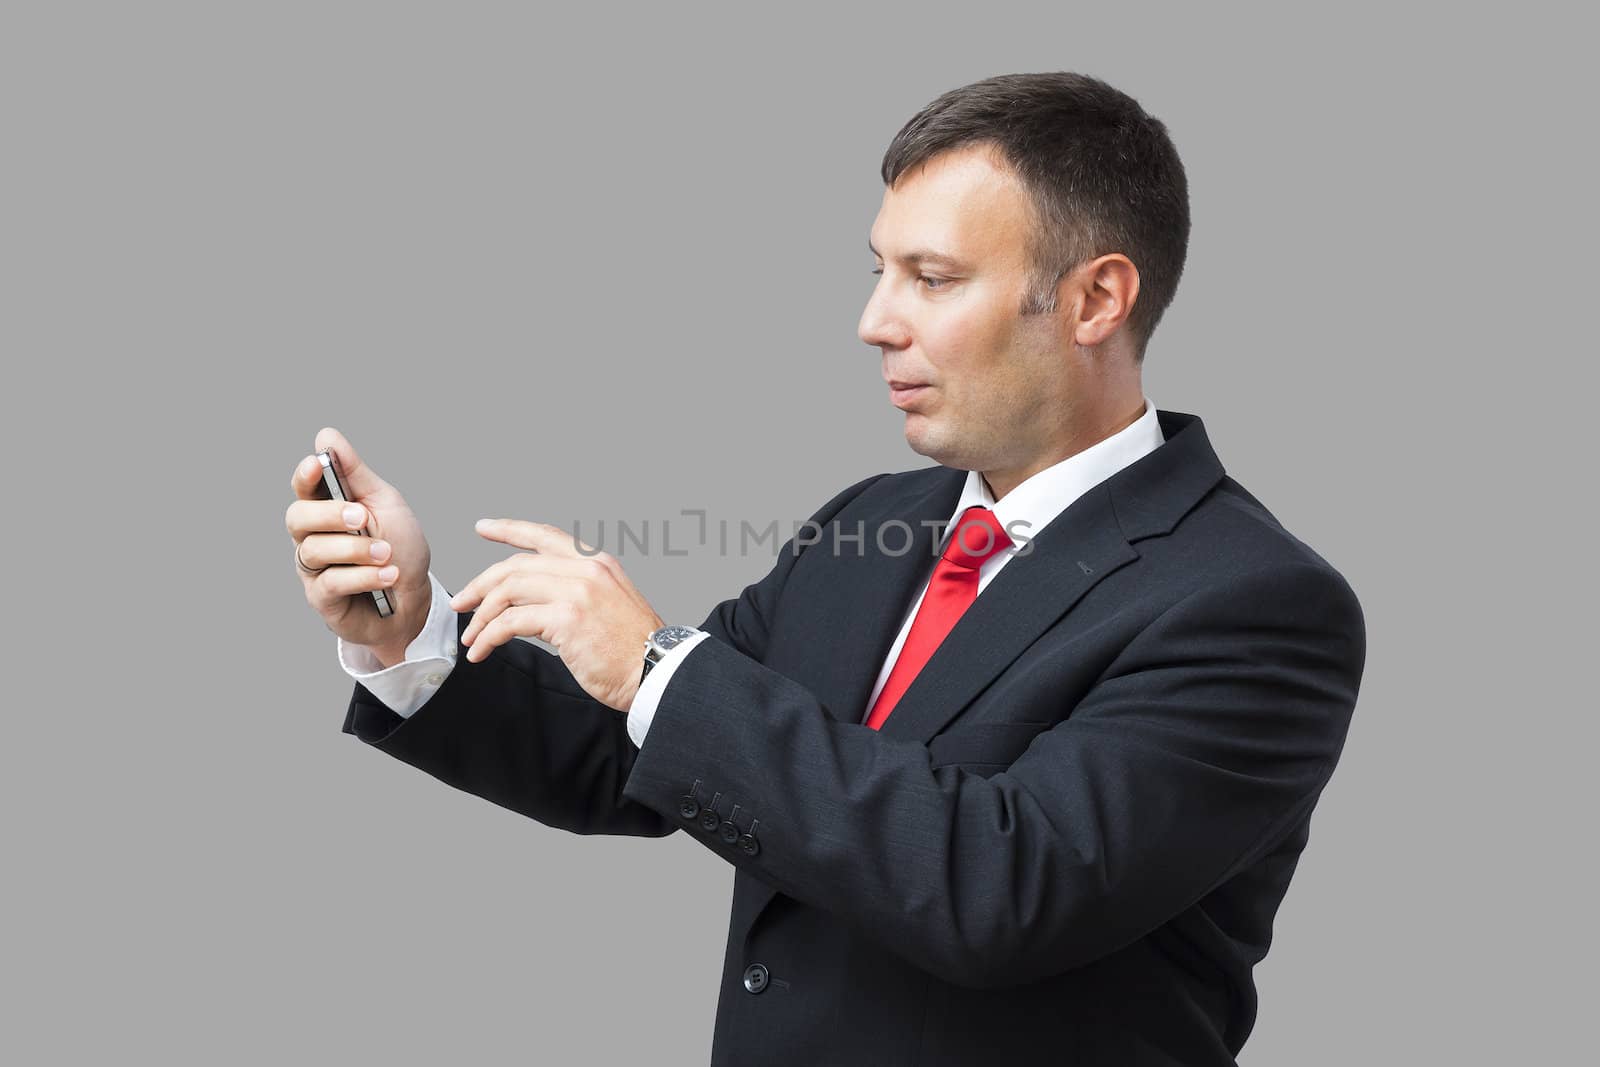 An image of a handsome business man and his mobile phone